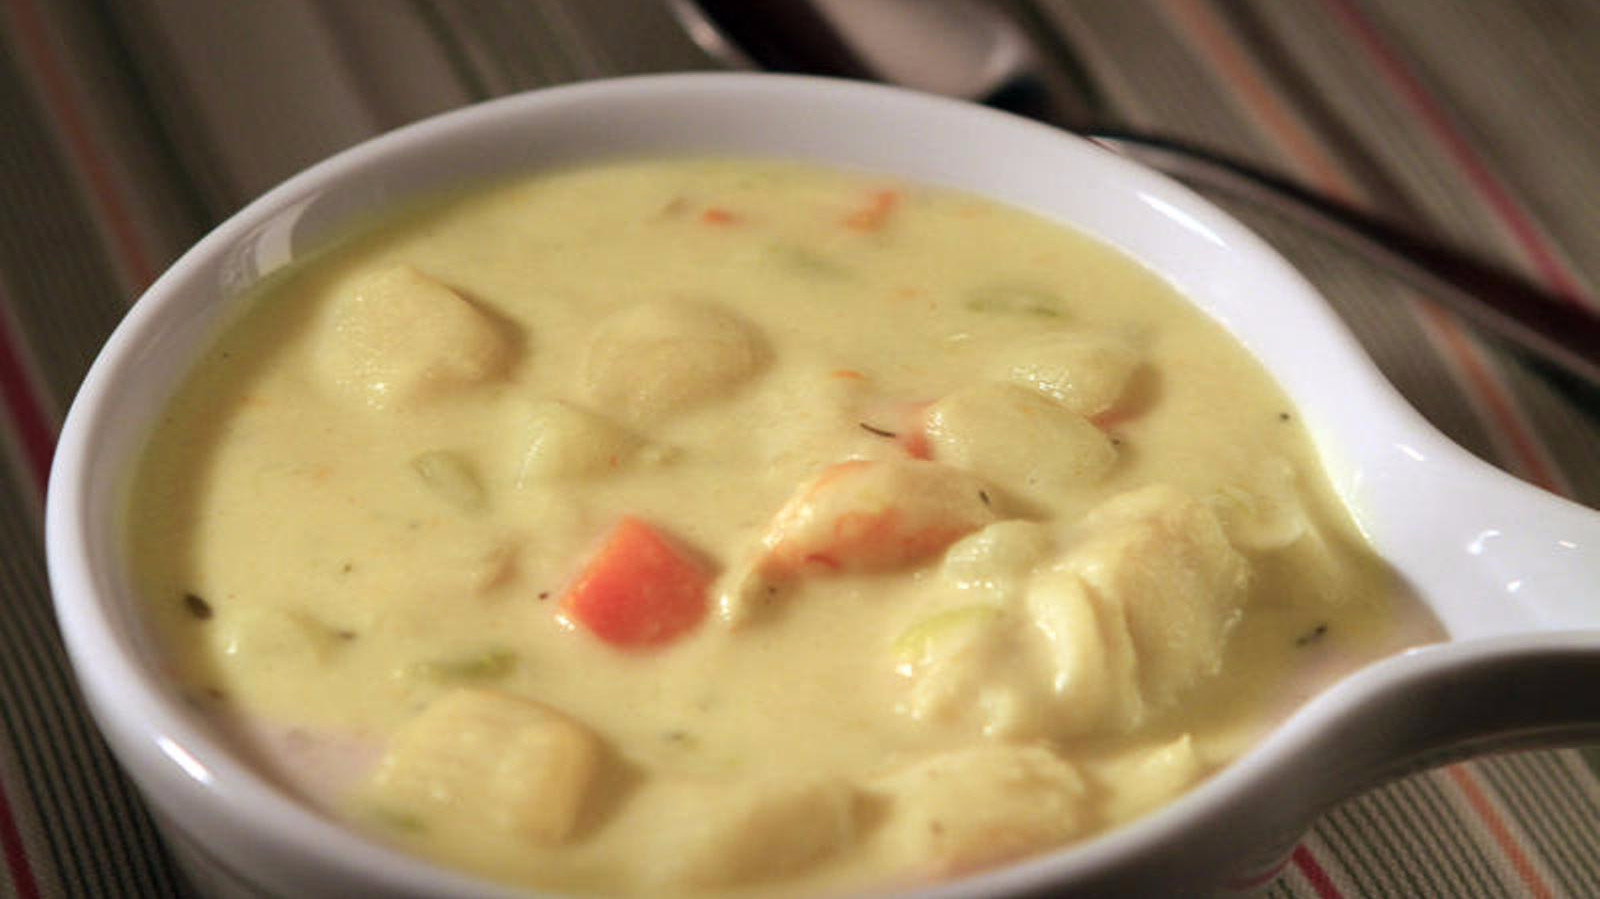 Seafood Chowder Soup Recipe
 This might be your new favorite seafood chowder recipe